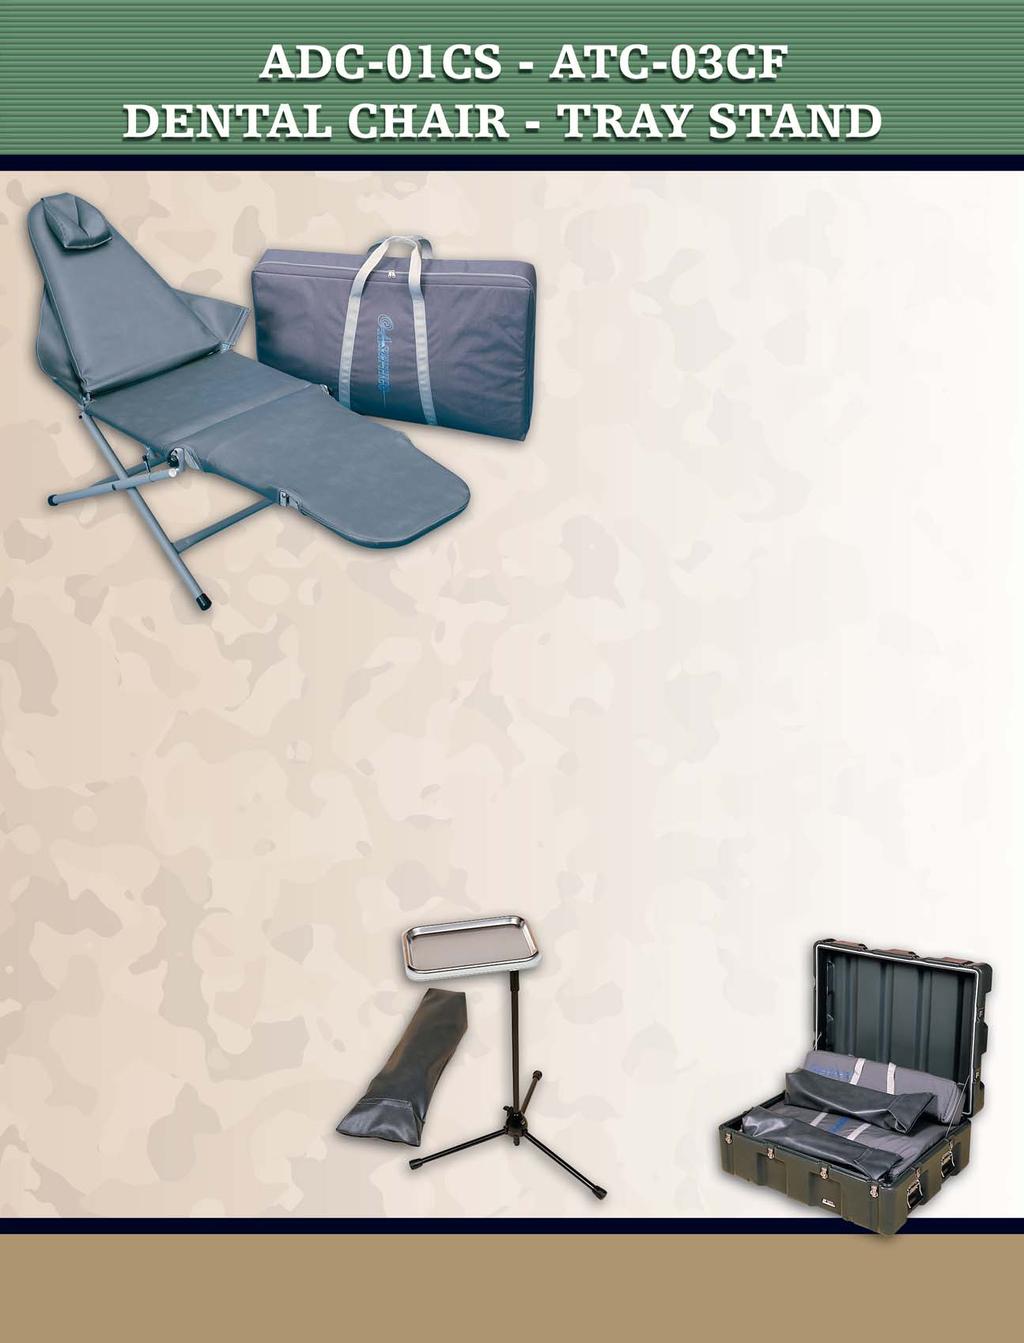 Professionals involved in portable dentistry continuously praise this chair! Lightweight, but very sturdy. Comfortable and safe for up to 500 lbs. (225 kg). High-strength steel construction.